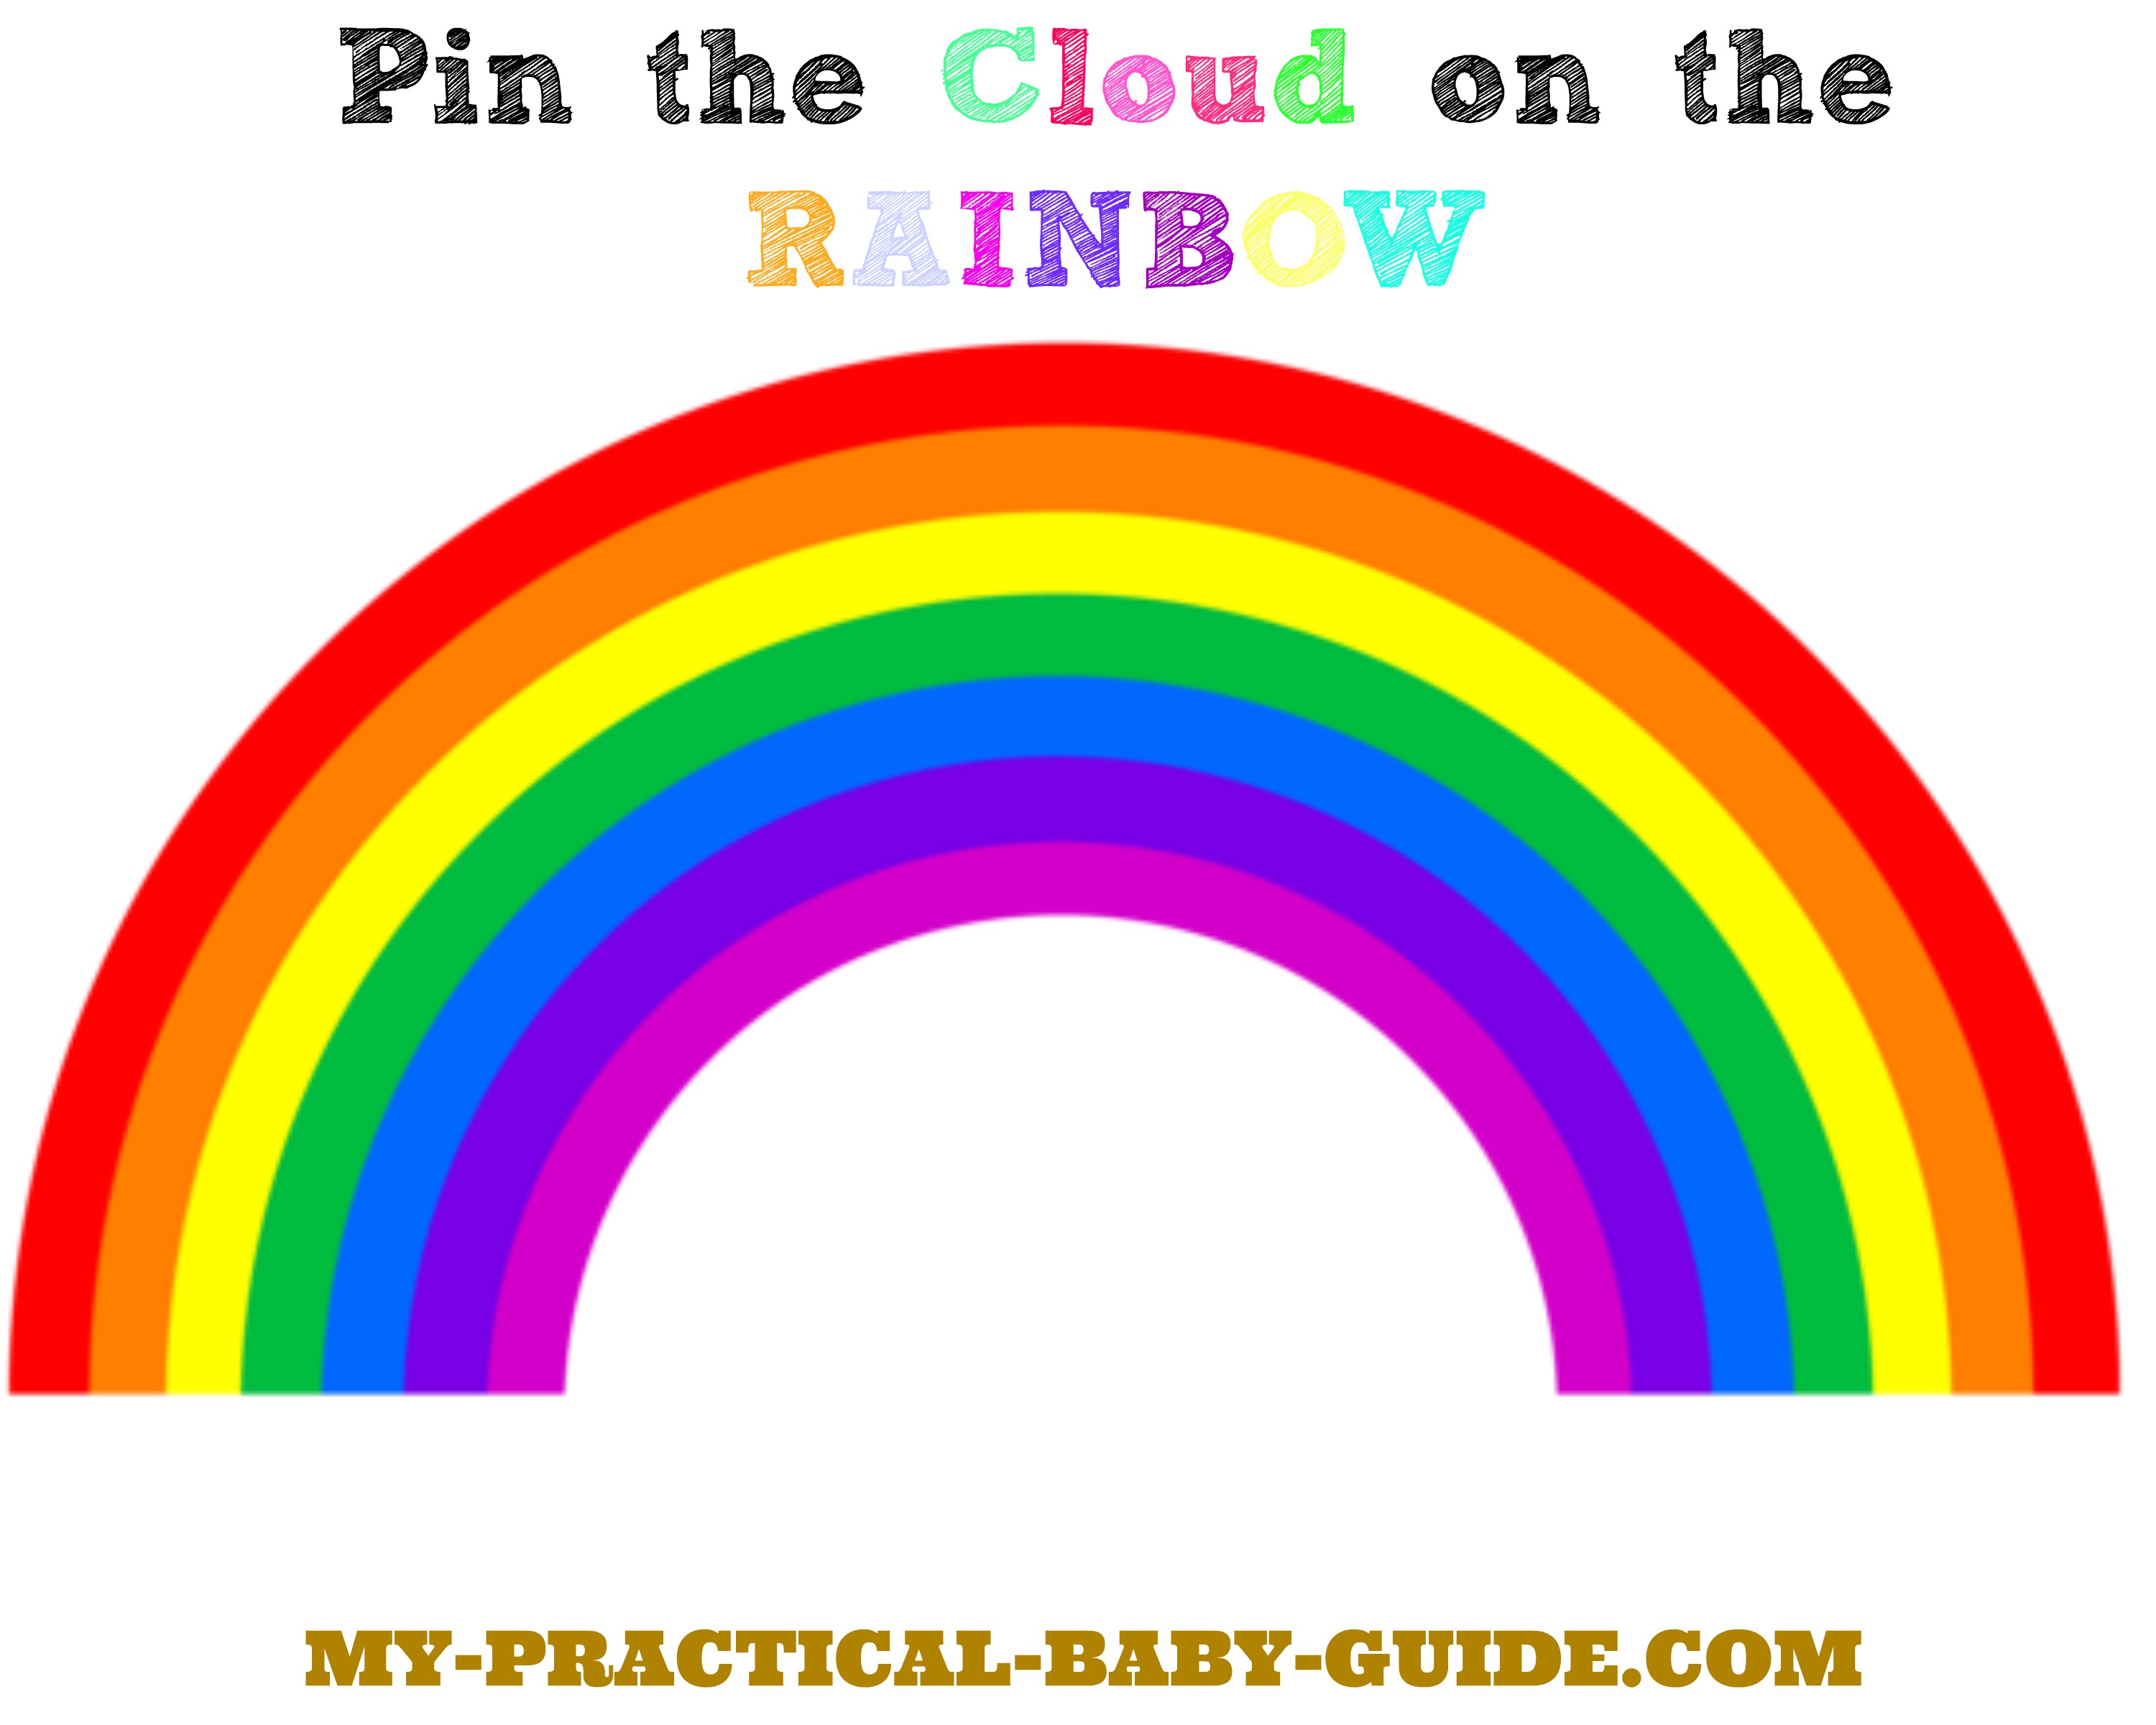 Free Printable Game Pin the Cloud in the Rainbow